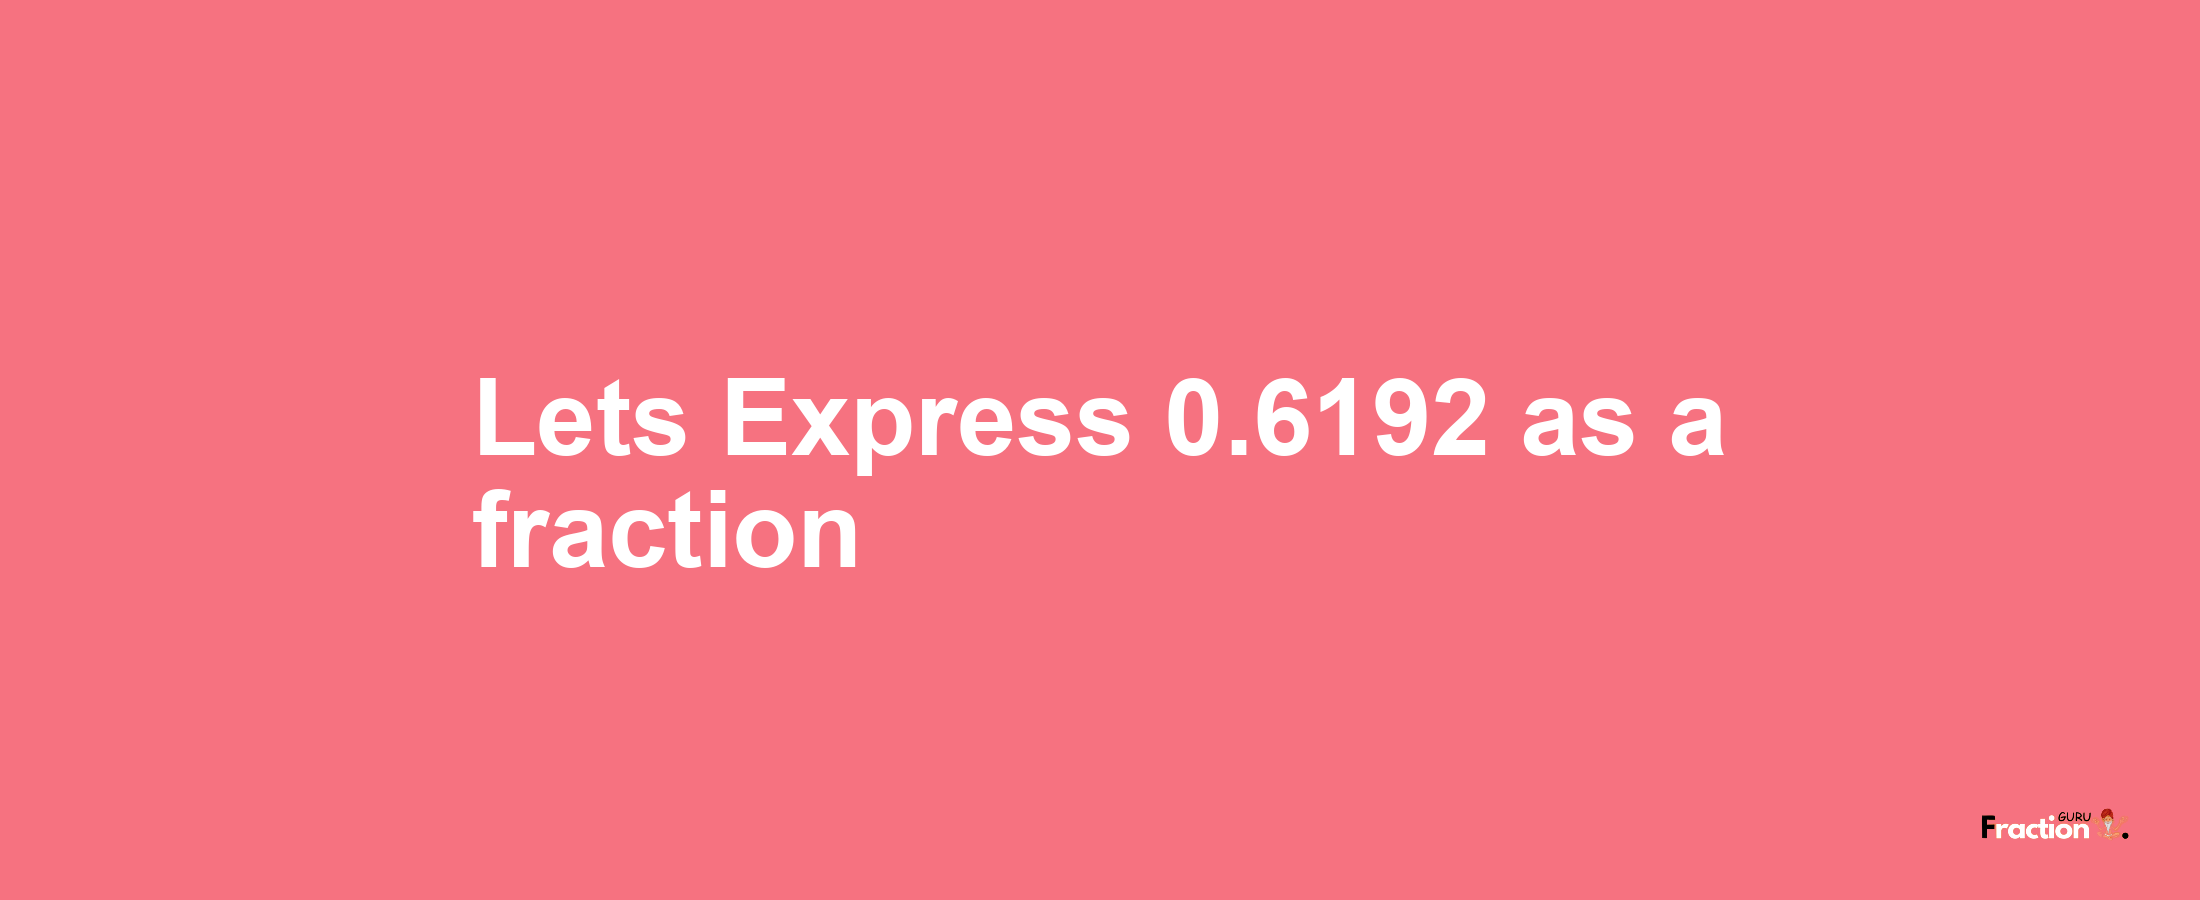 Lets Express 0.6192 as afraction